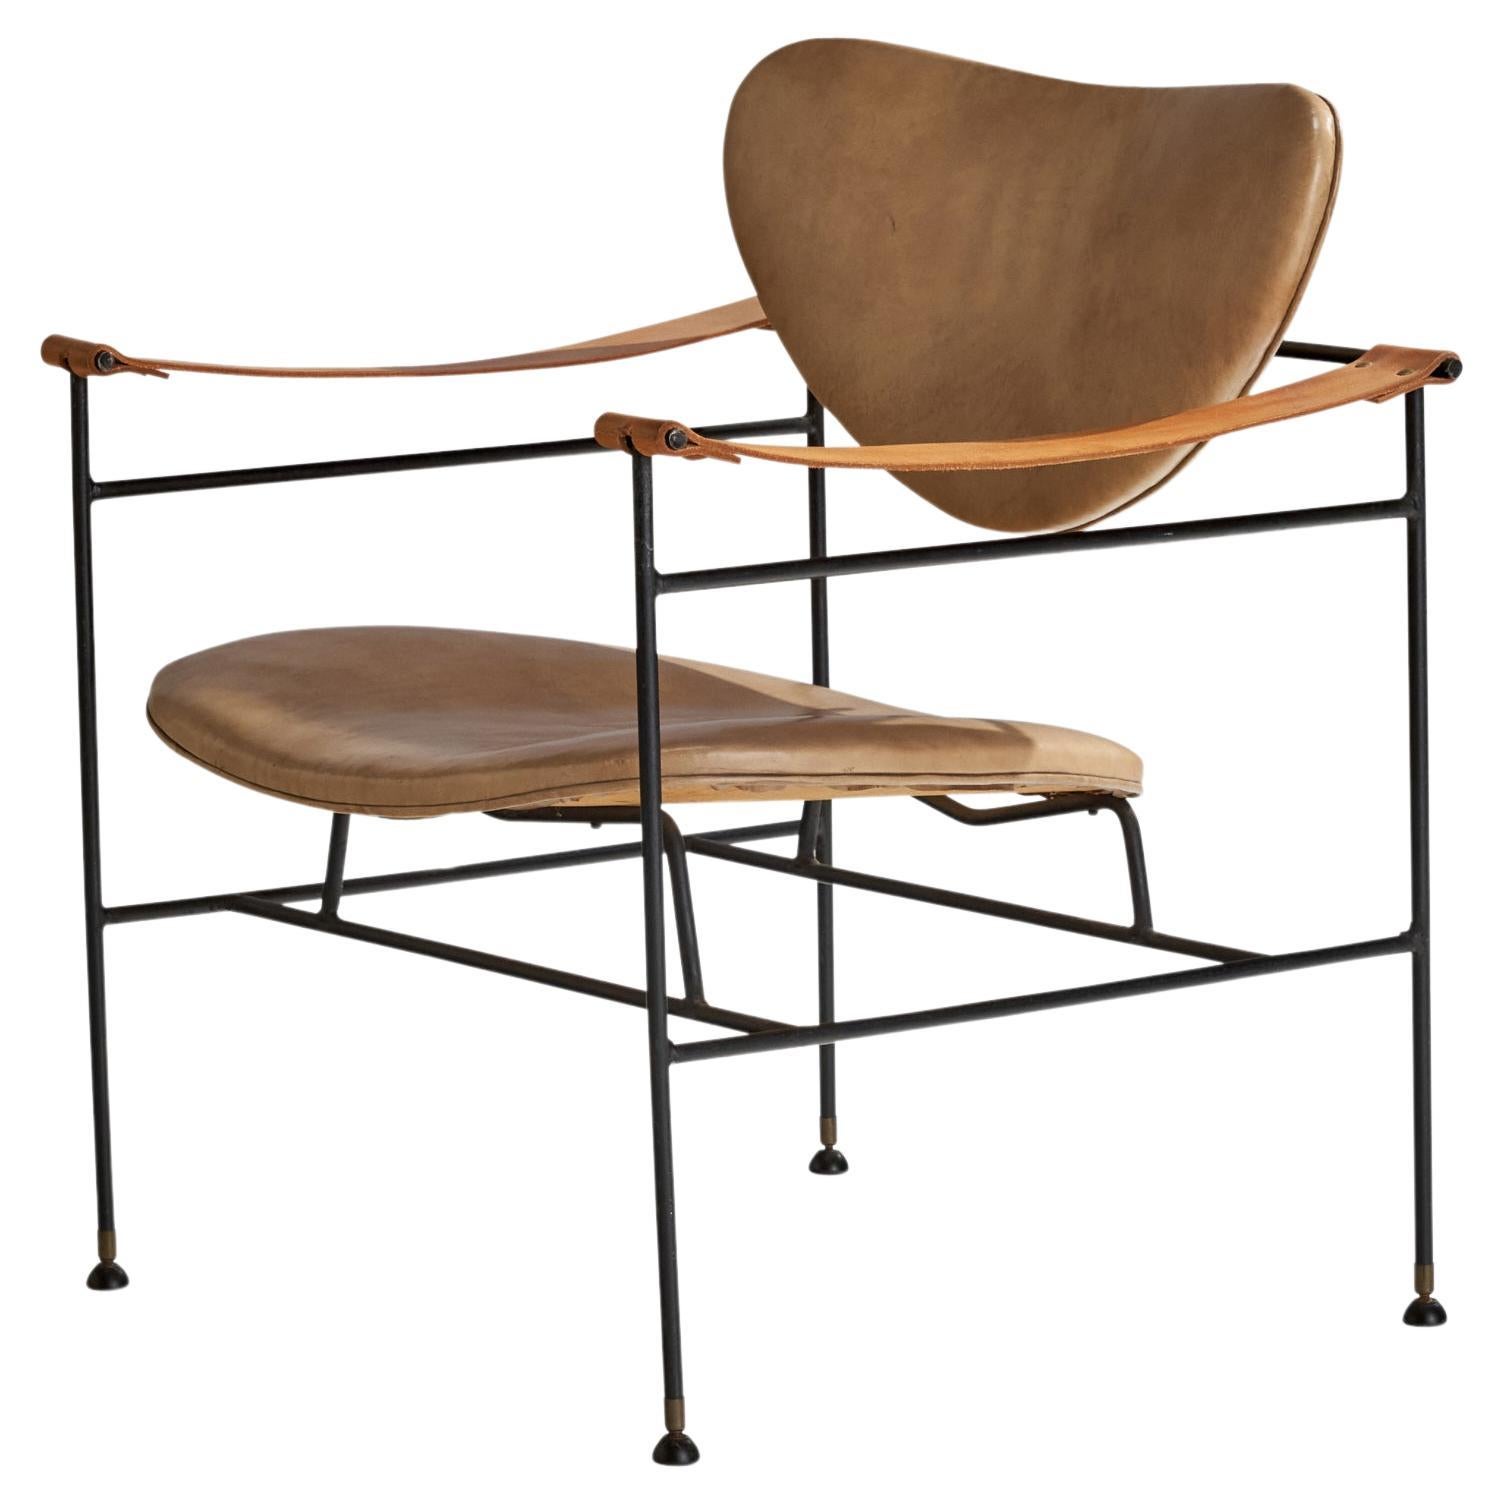 Reilly-Wolff & Associates Attribution, Armchair, Metal, Leather, USA, 1951 For Sale